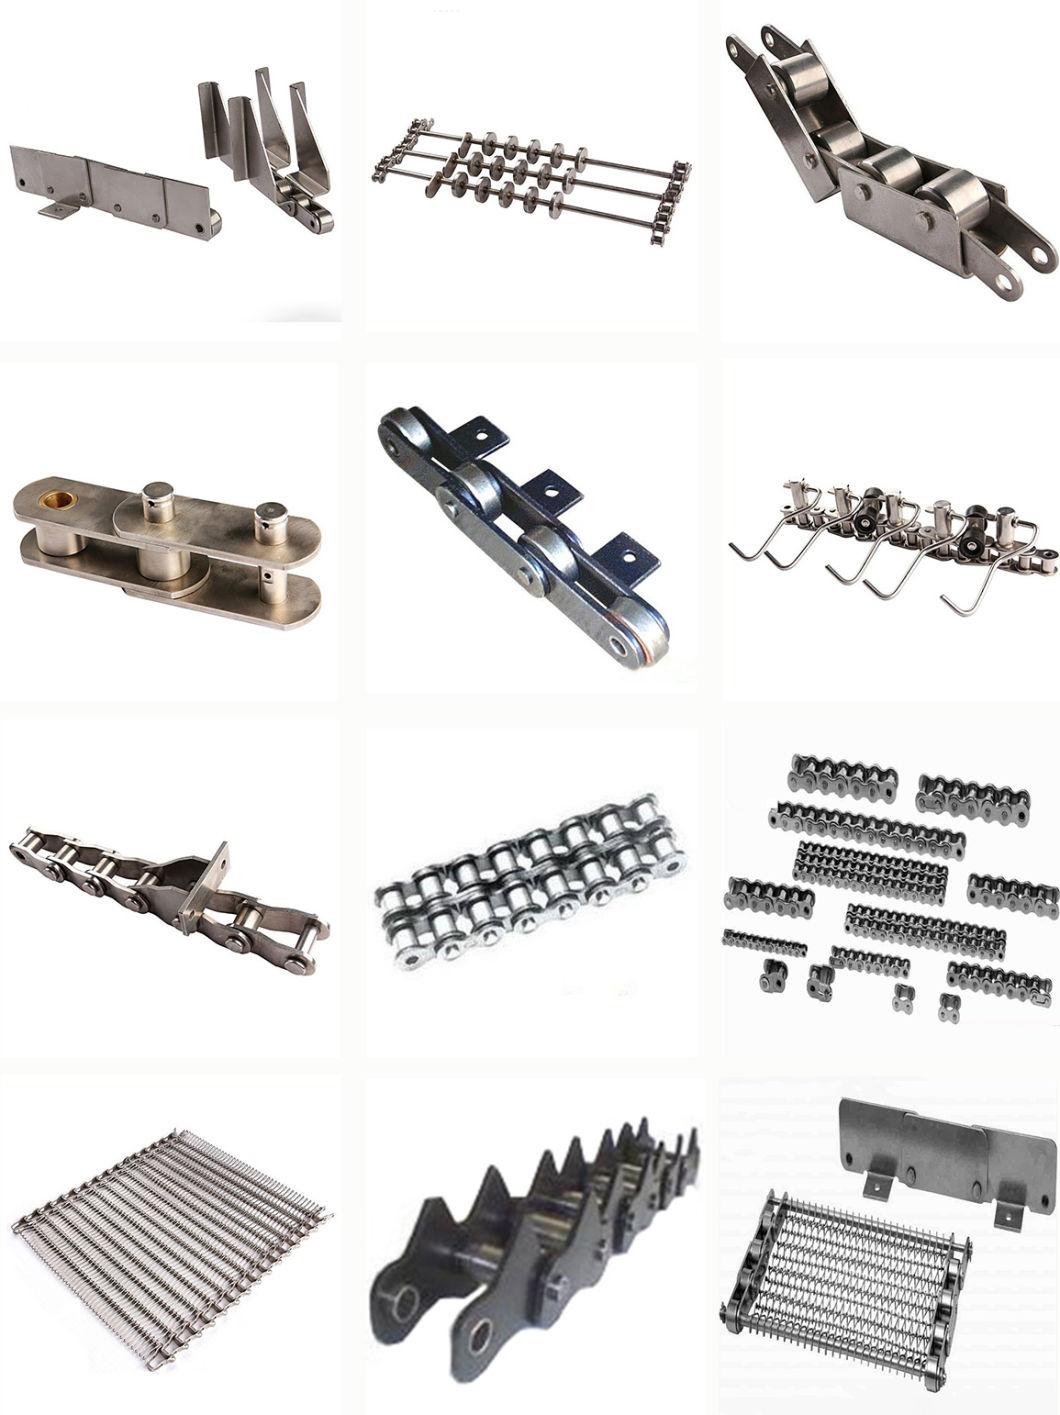 High Sales Metal Hardness Parts Stainless Steel Agriculture Machinery Industrial Double Pitch Conveyor Chain with Attachments